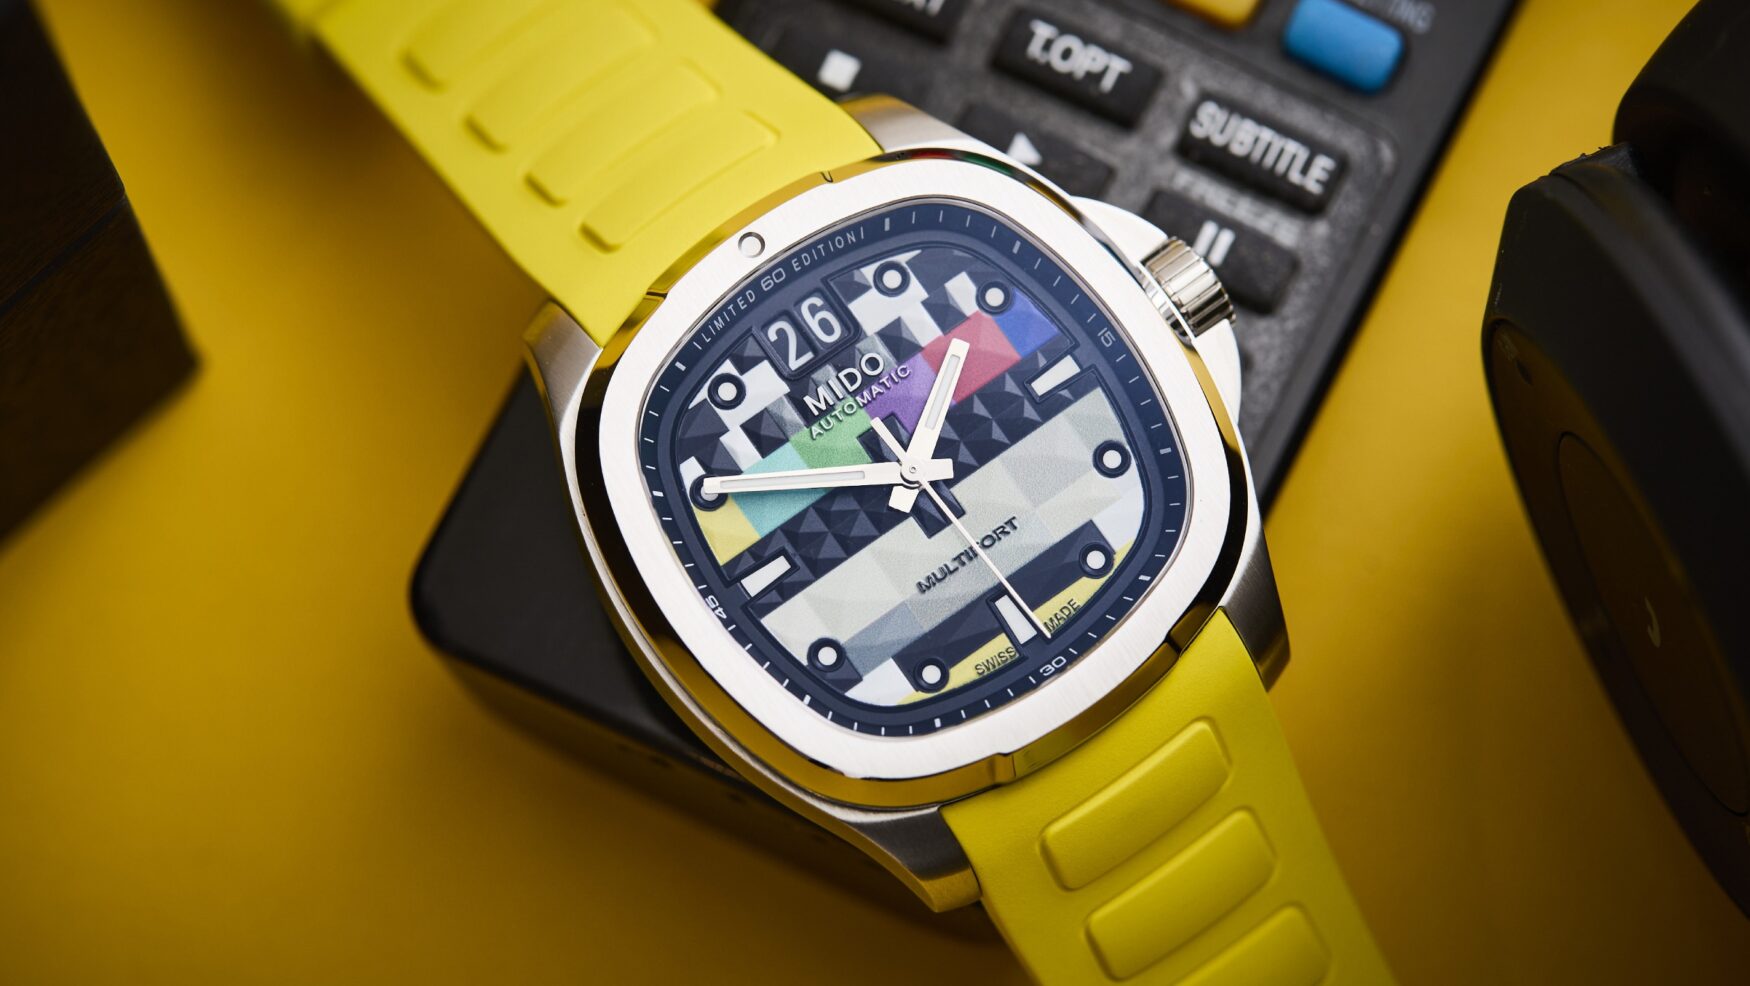 Don’t touch that dial: the Mido Multifort TV Big Date S01E01 is a funky retro limited edition